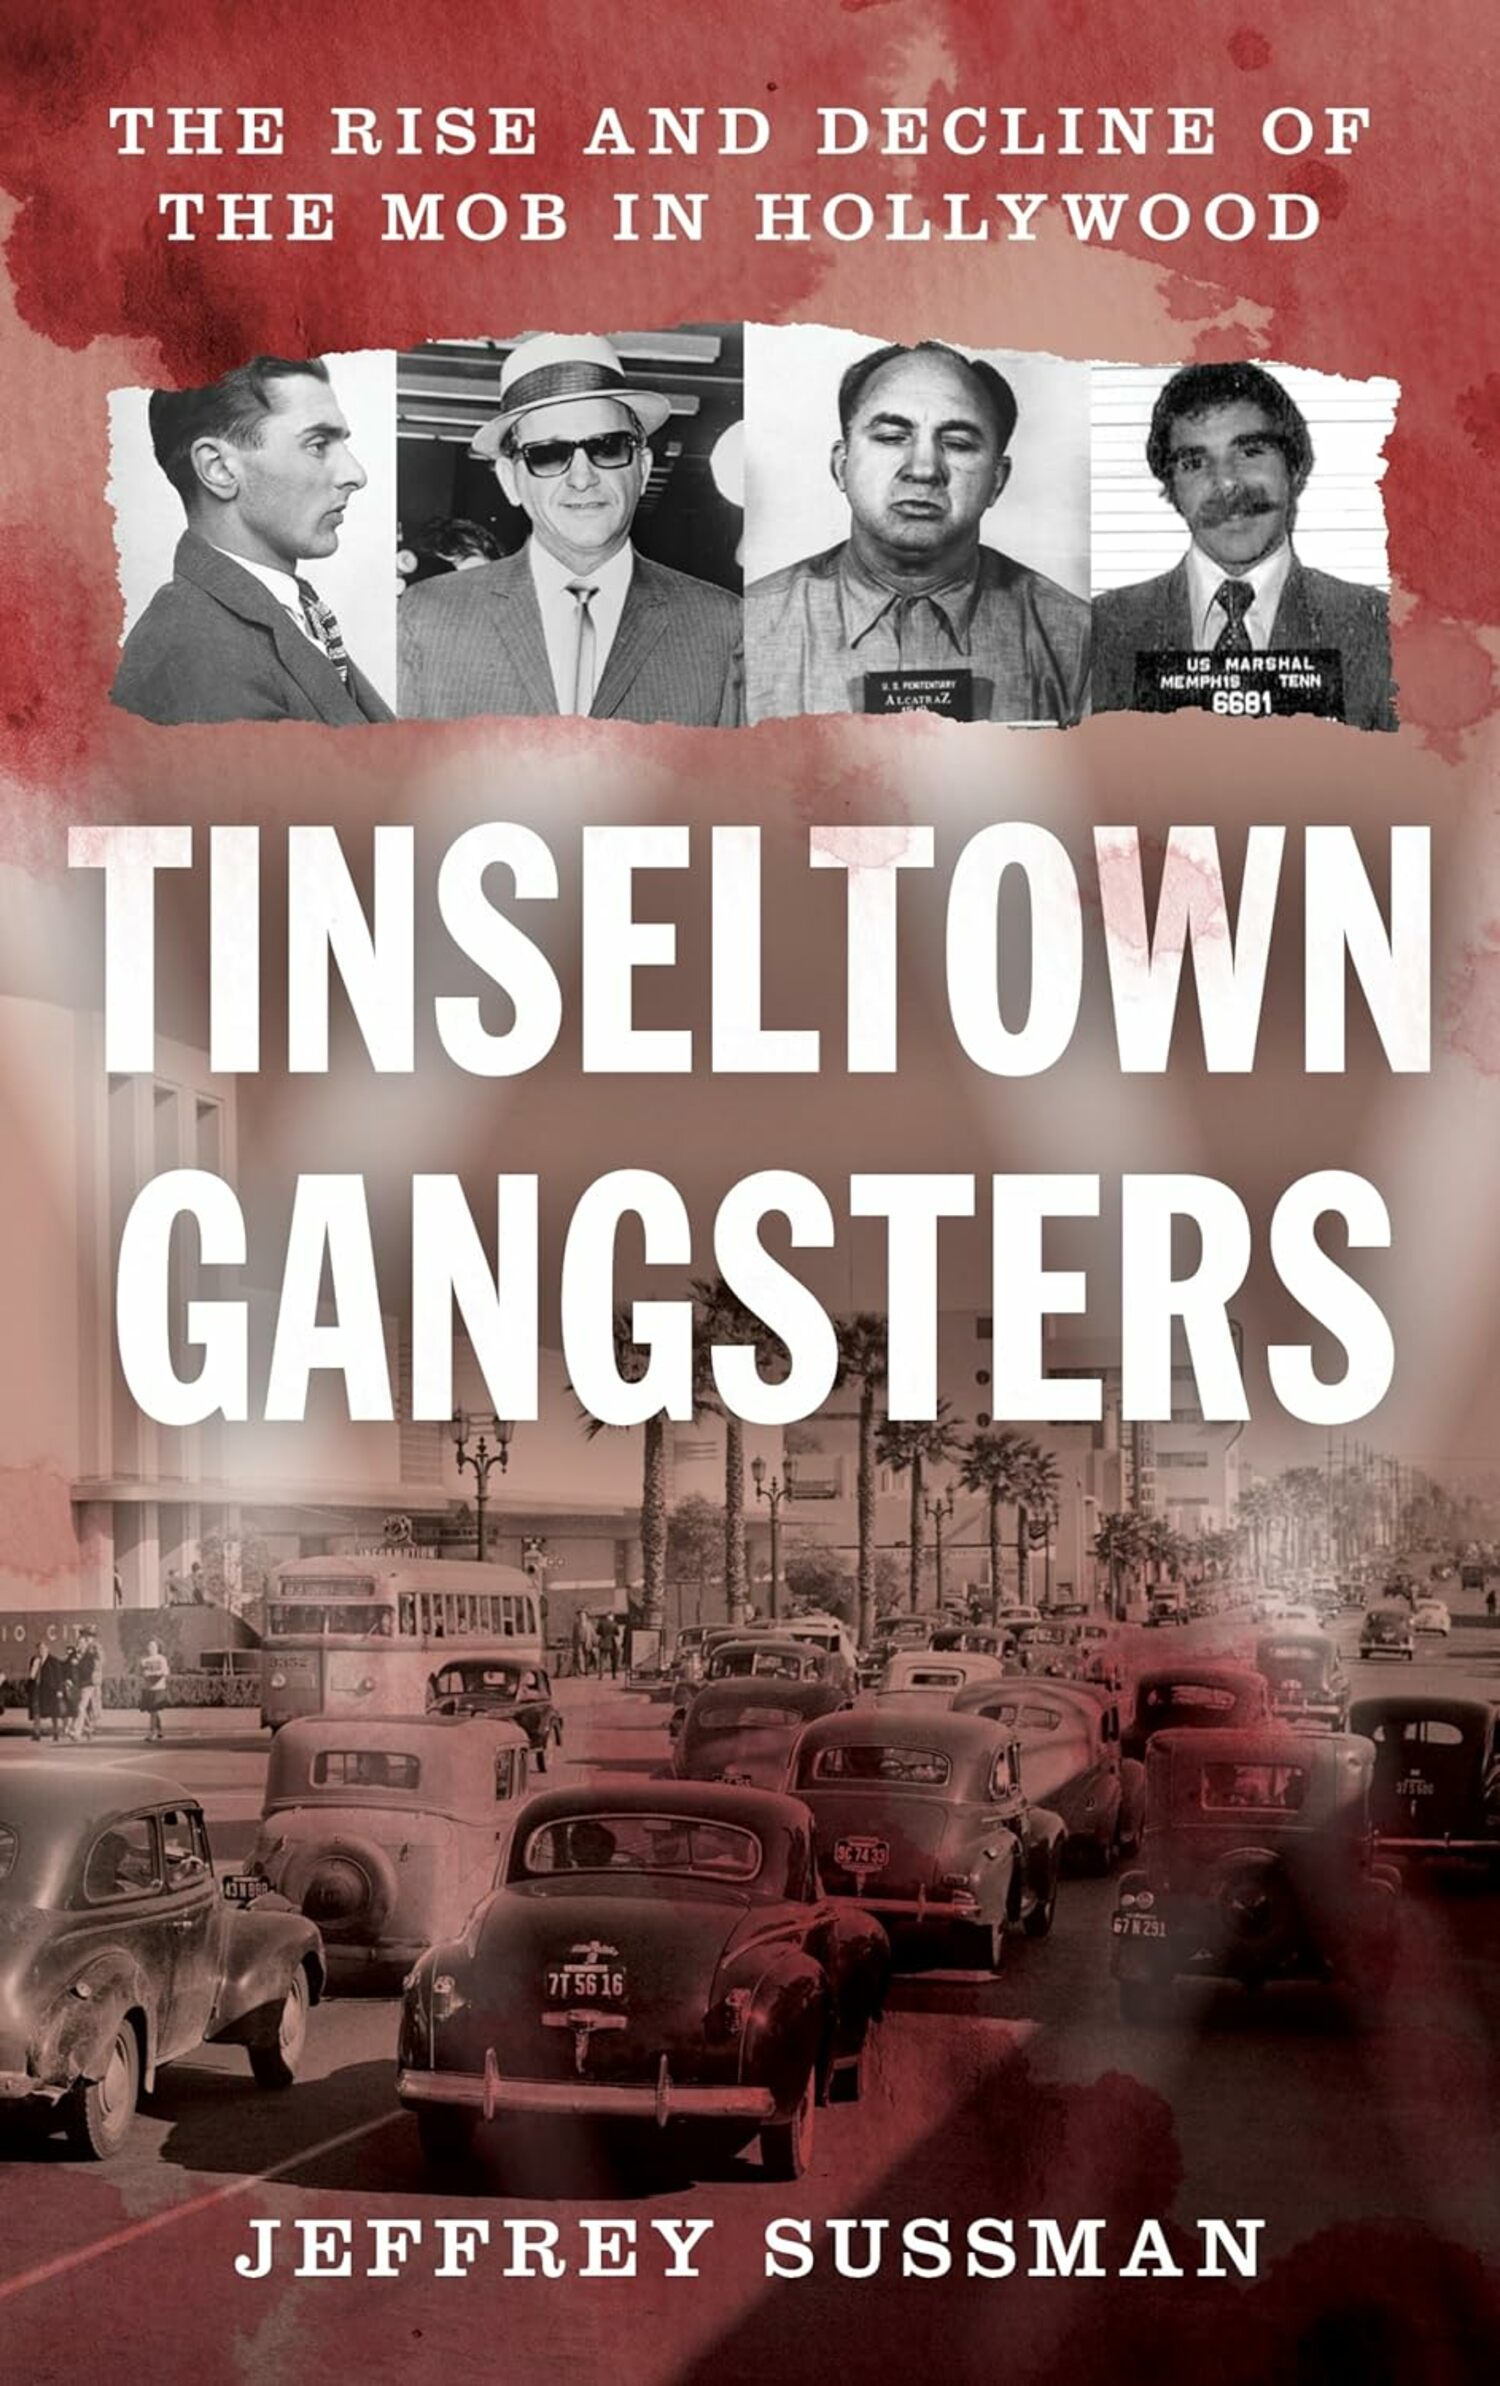 Jeffrey Sussman's new book is about the mafia's involvement in the film industry.